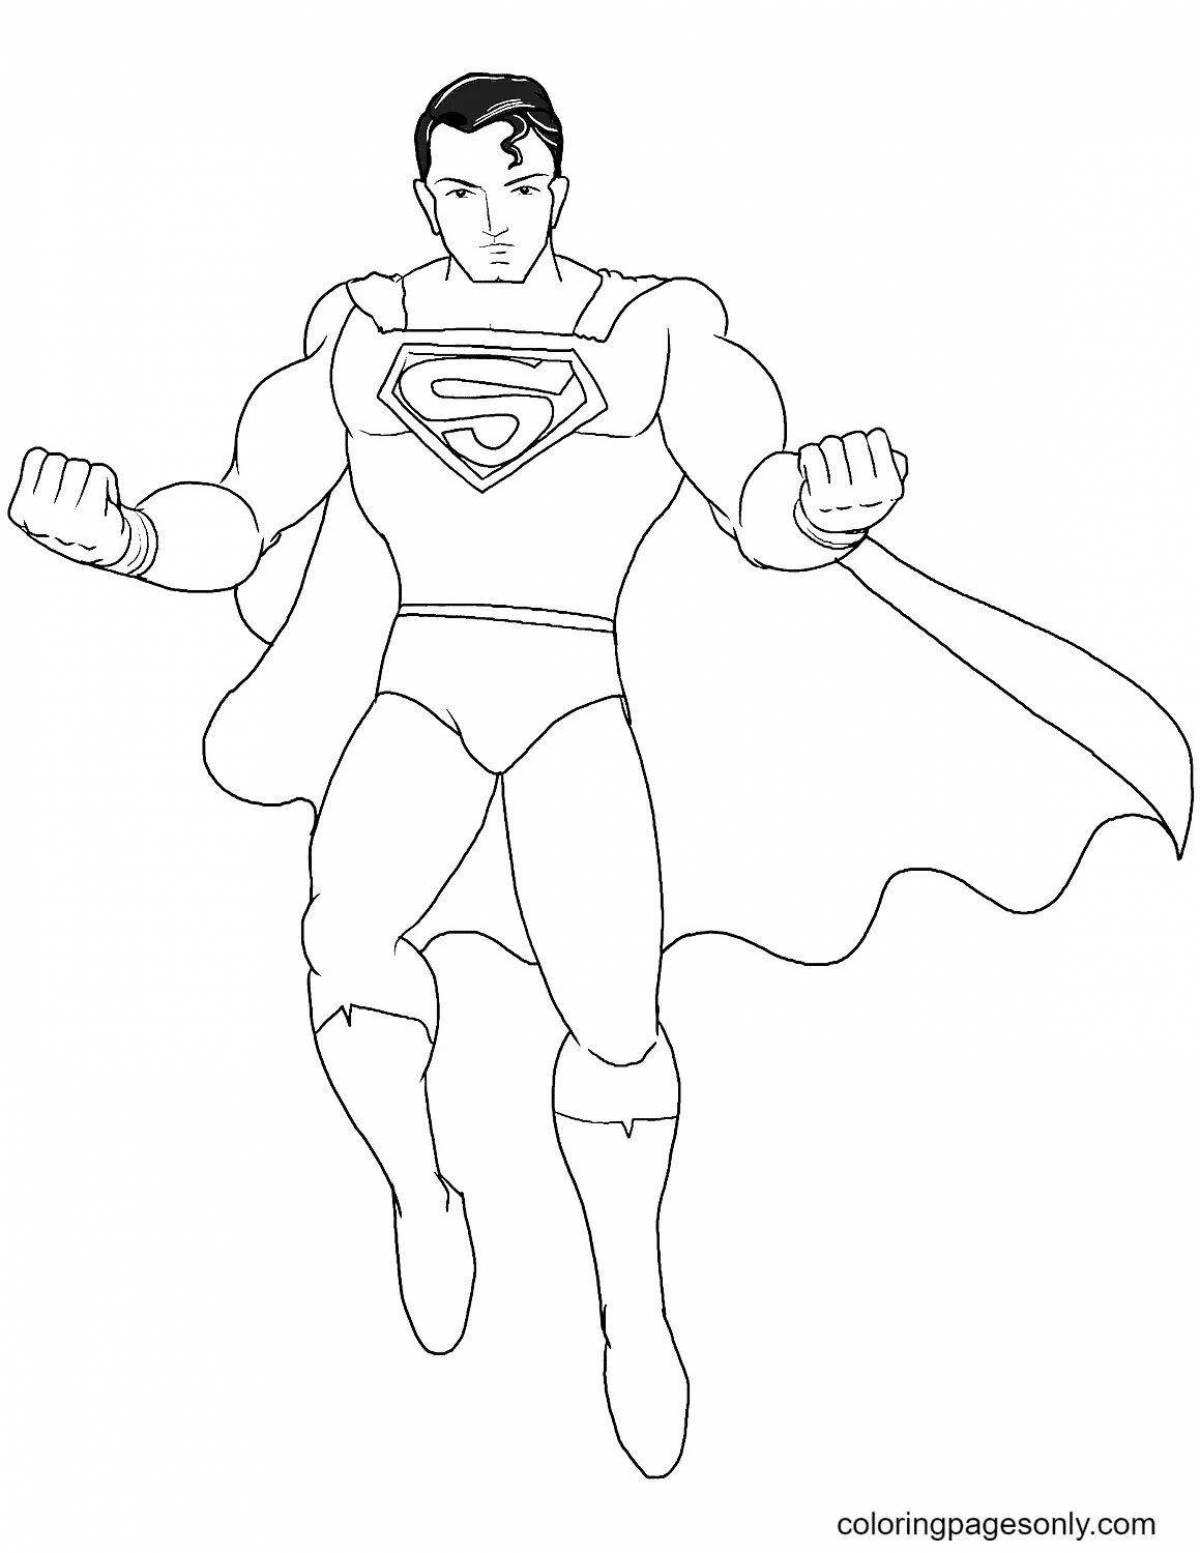 Cute superman coloring book for kids 3-4 years old